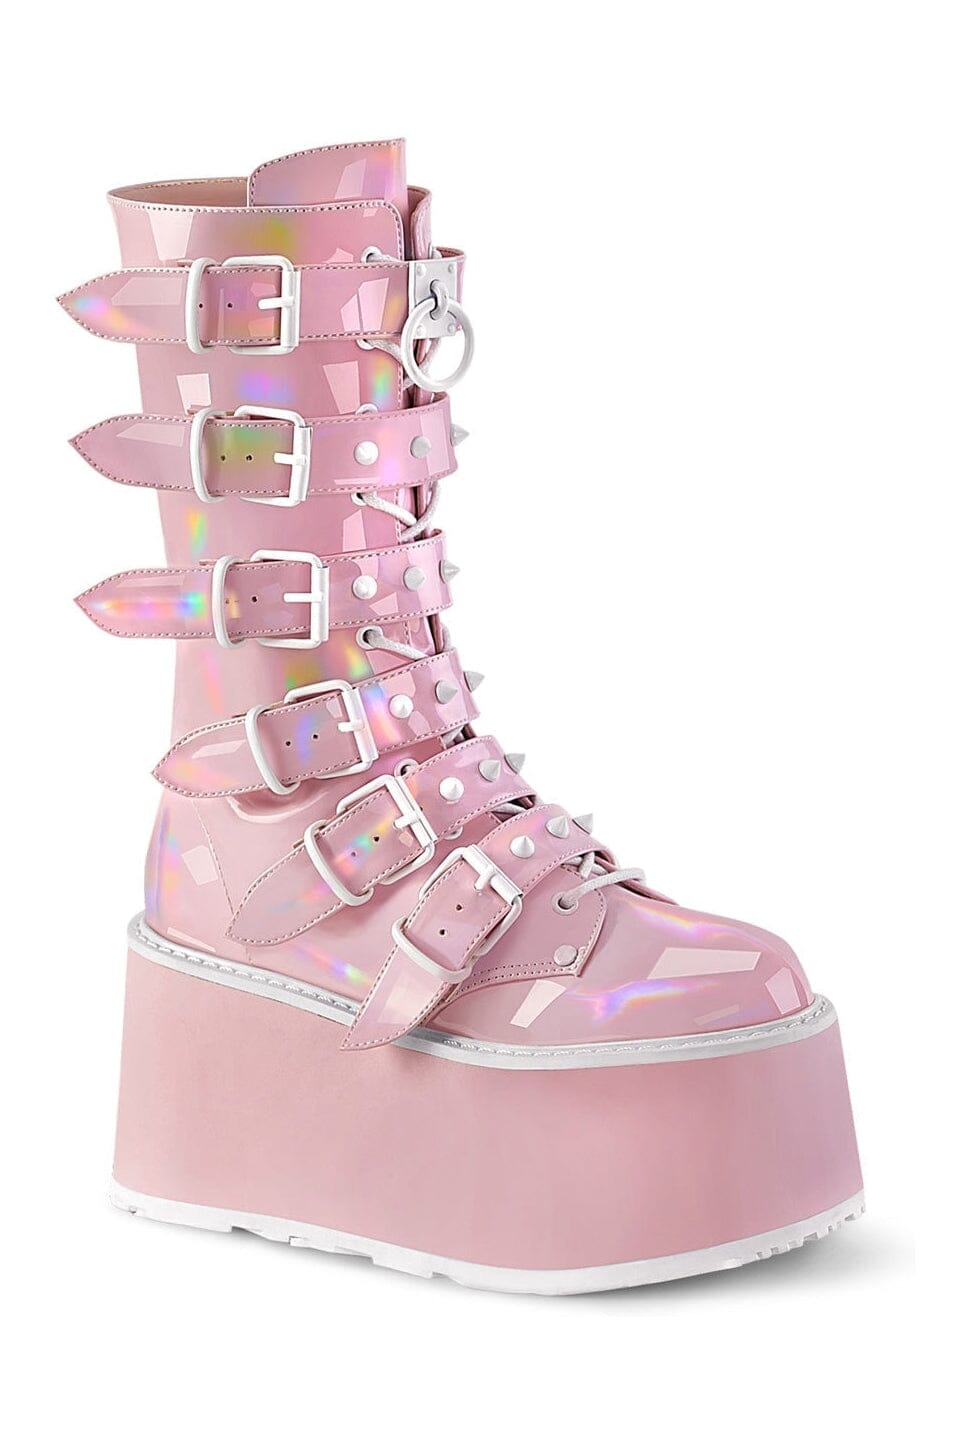 DAMNED-225 Pink Hologram Patent Knee Boot-Knee Boots-Demonia-Pink-10-Hologram Patent-SEXYSHOES.COM